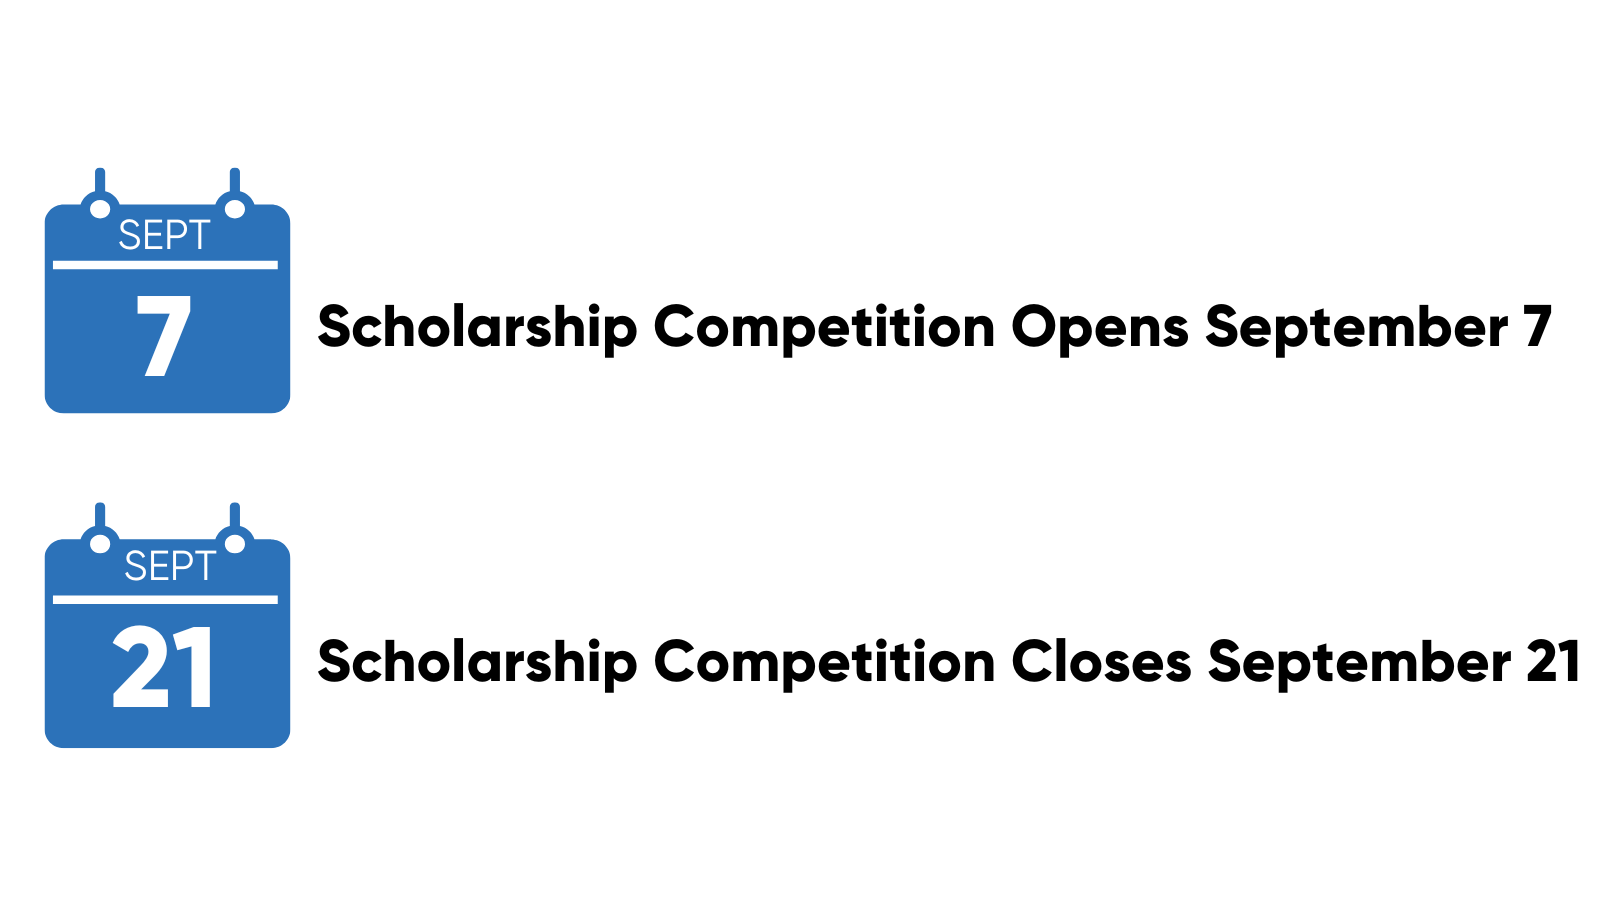 Scholarship Competition Opens September 7. Scholarship Competition Closes September 21.